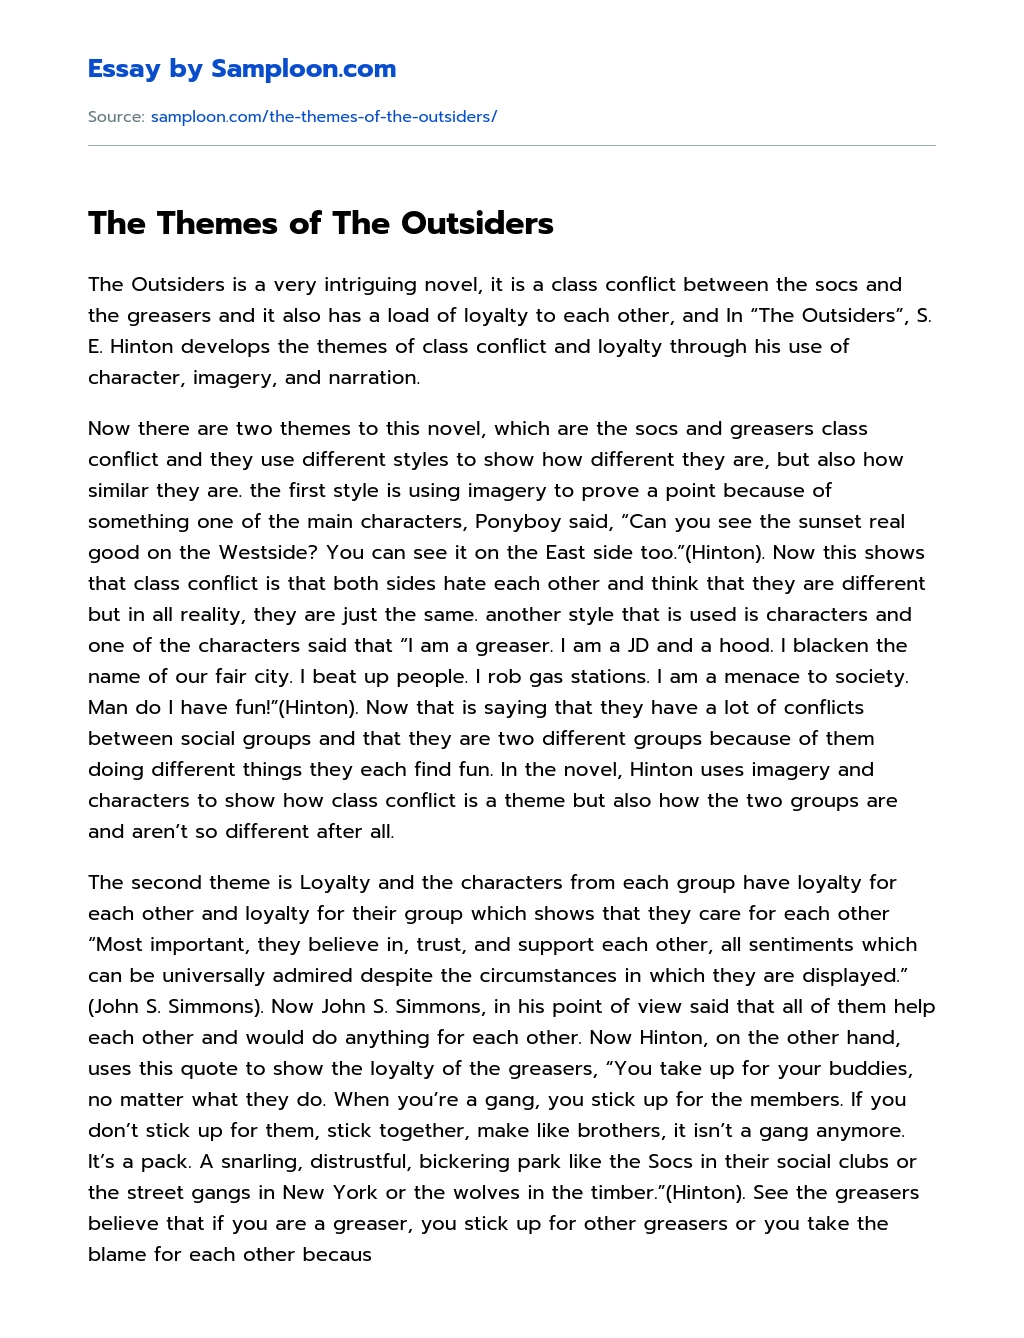 The Themes of The Outsiders Analytical Essay essay